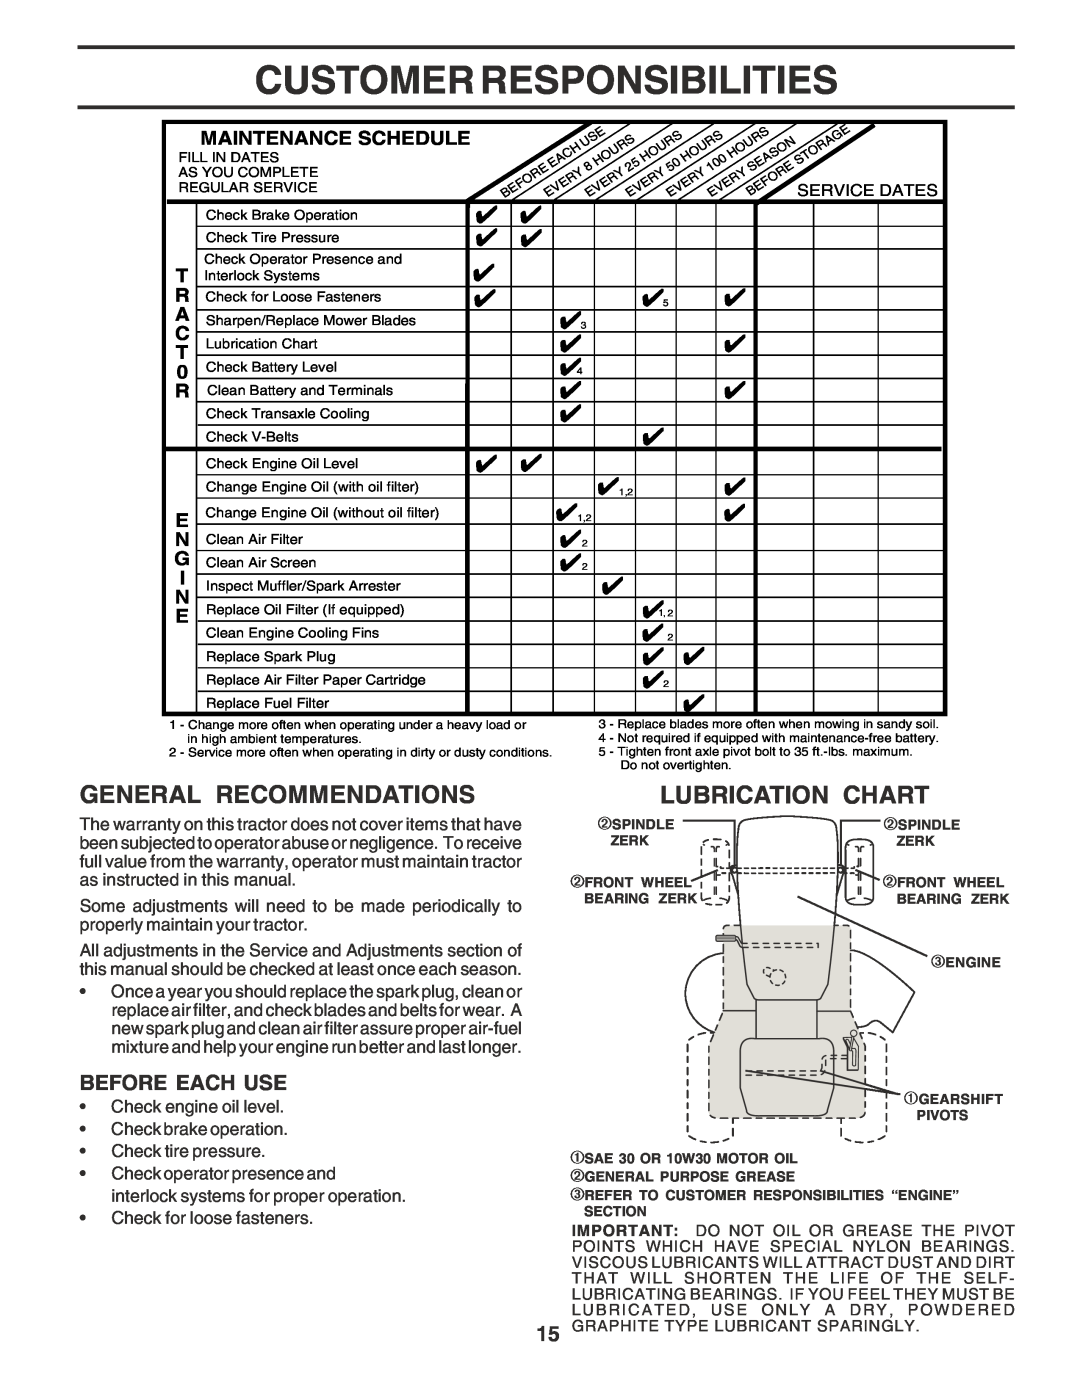 Poulan 181377 owner manual Customer Responsibilities, General Recommendations, Lubrication Chart, Before Each Use 